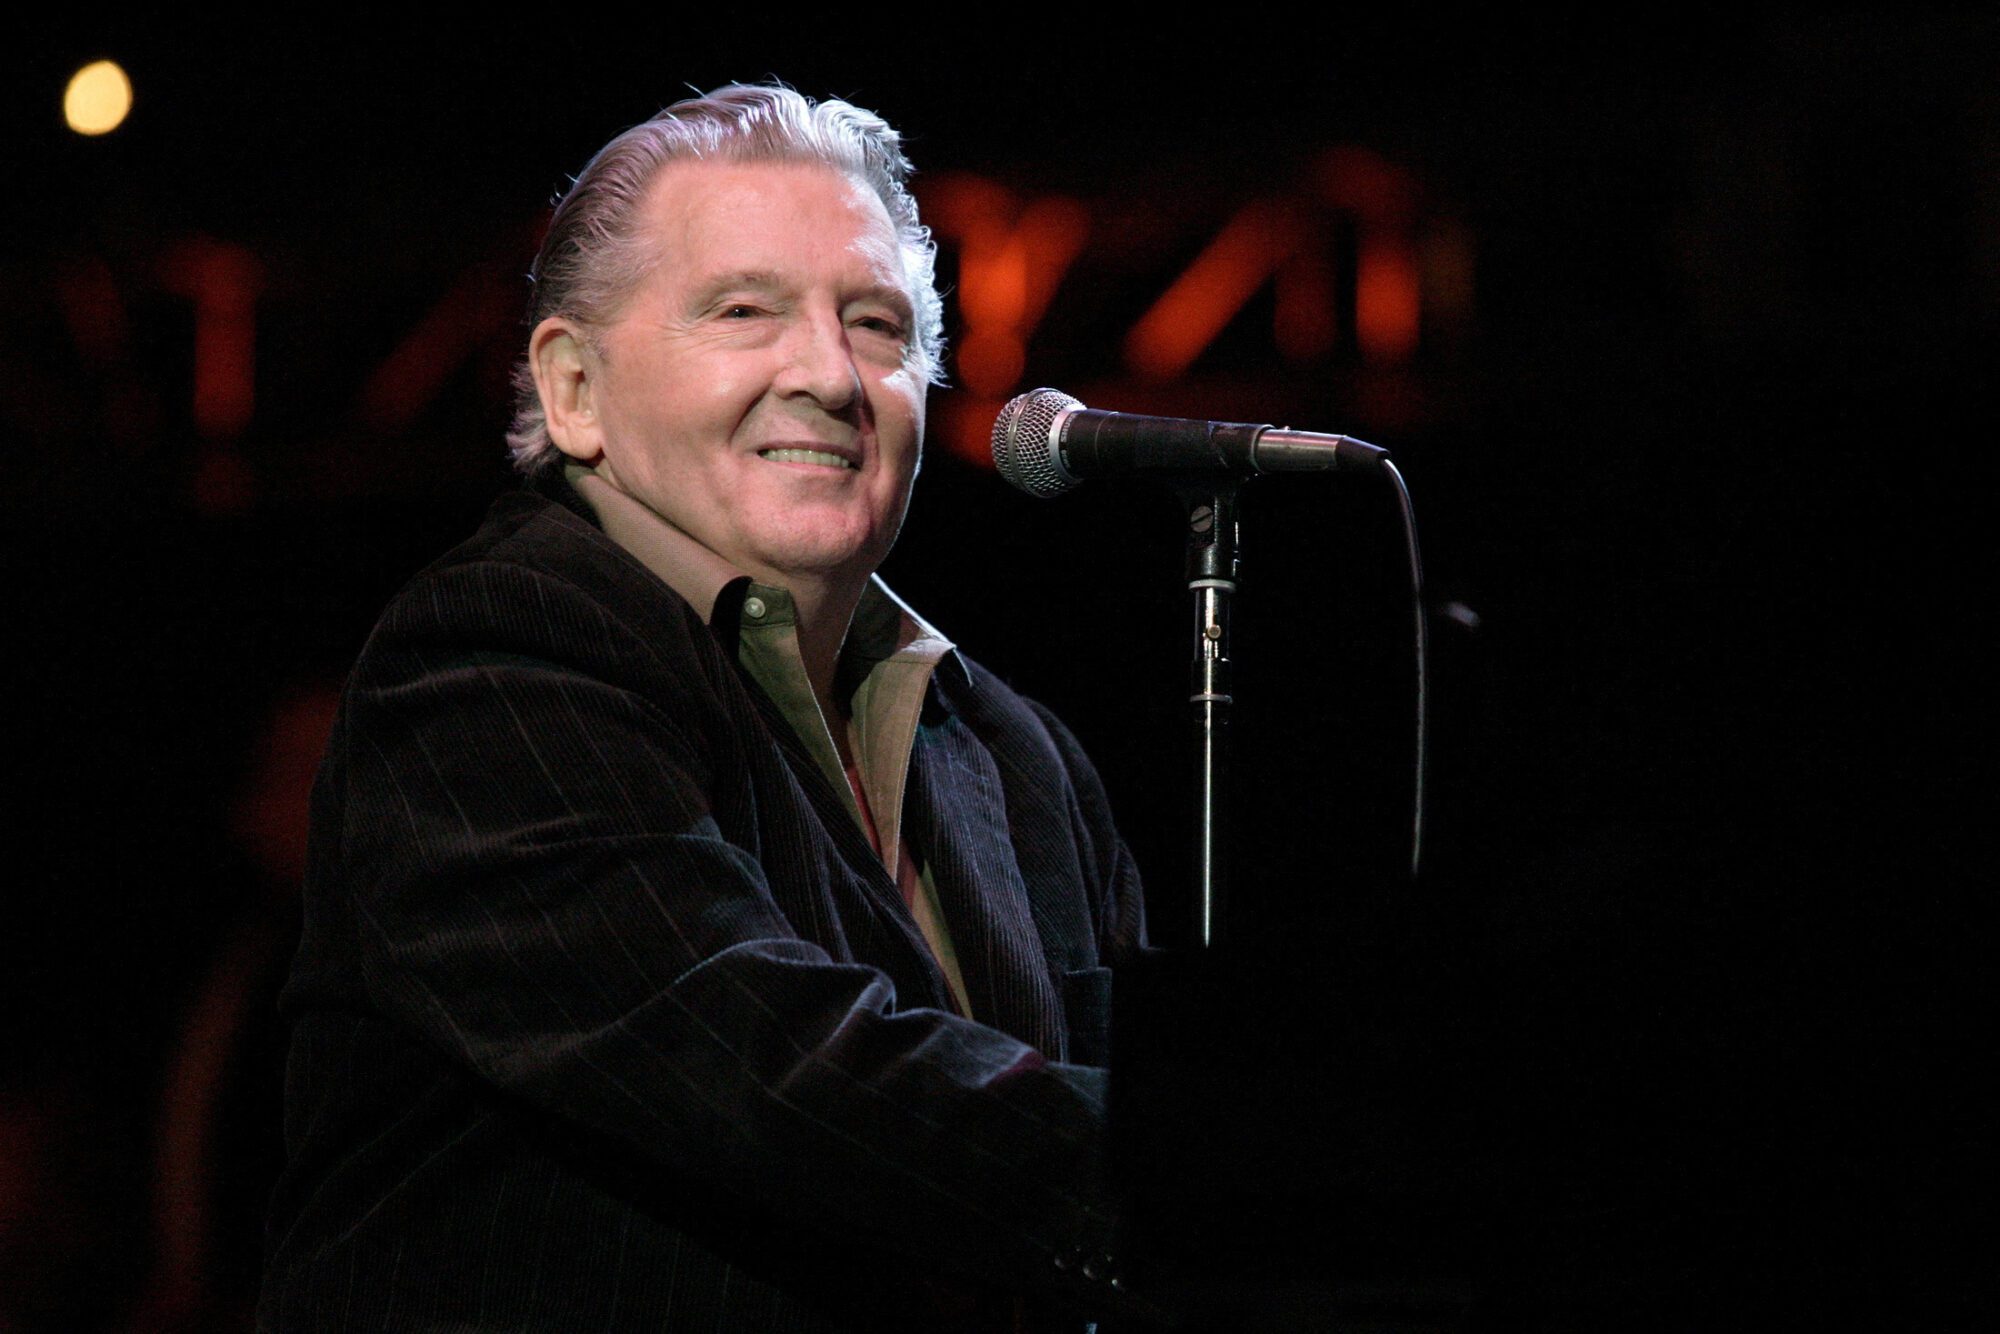 Jerry Lee Lewis performs at the19th annual Bridge School Benefit Concert in Mountain View, California October 29, 2005.    REUTERS